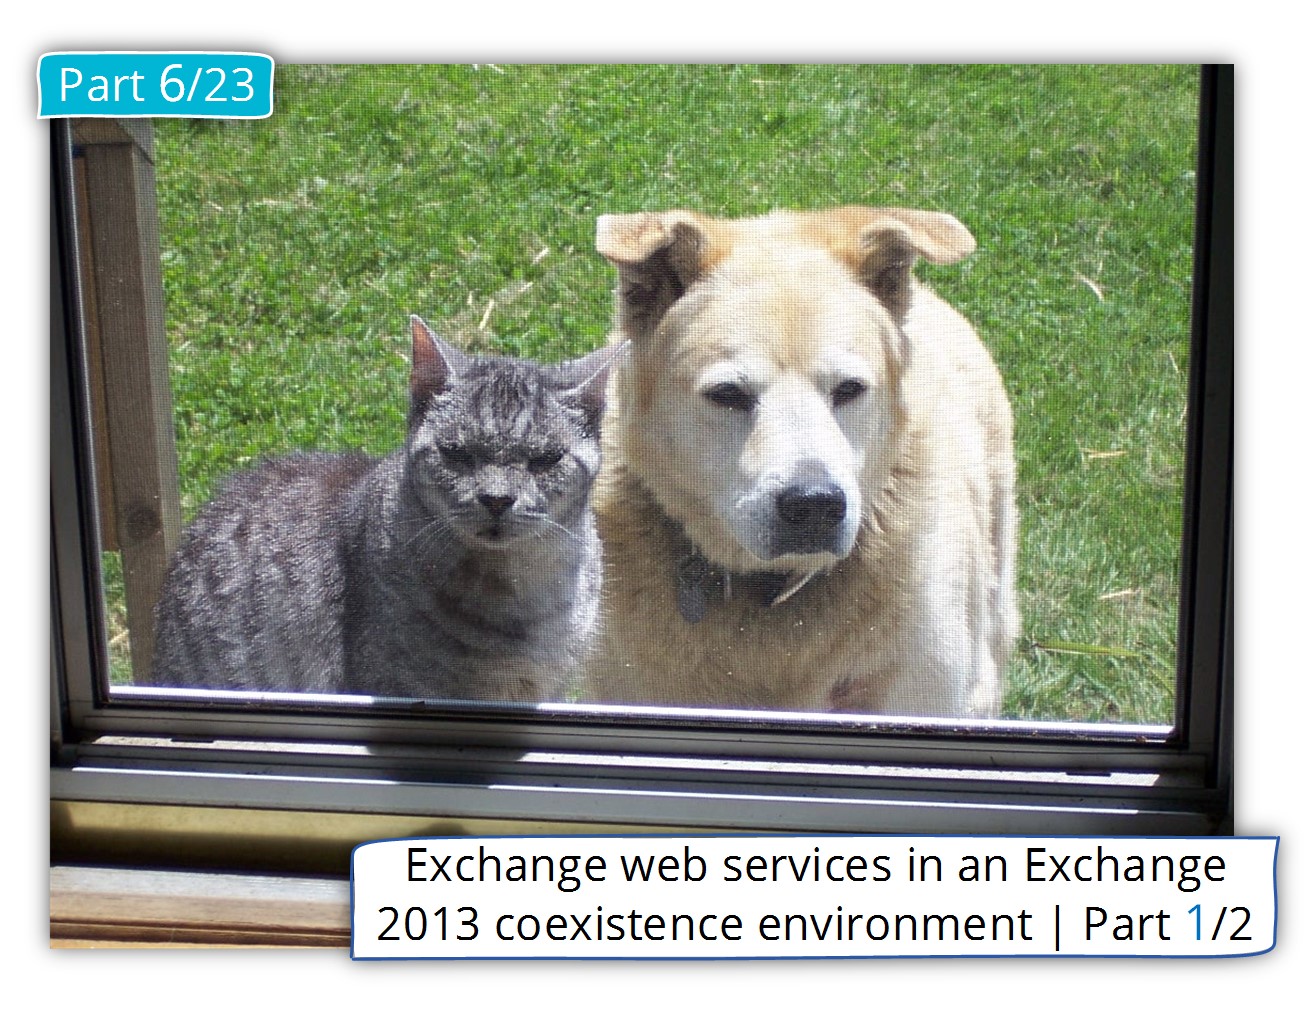 Exchange web services in an Exchange 2013 coexistence environment | Part 1/2